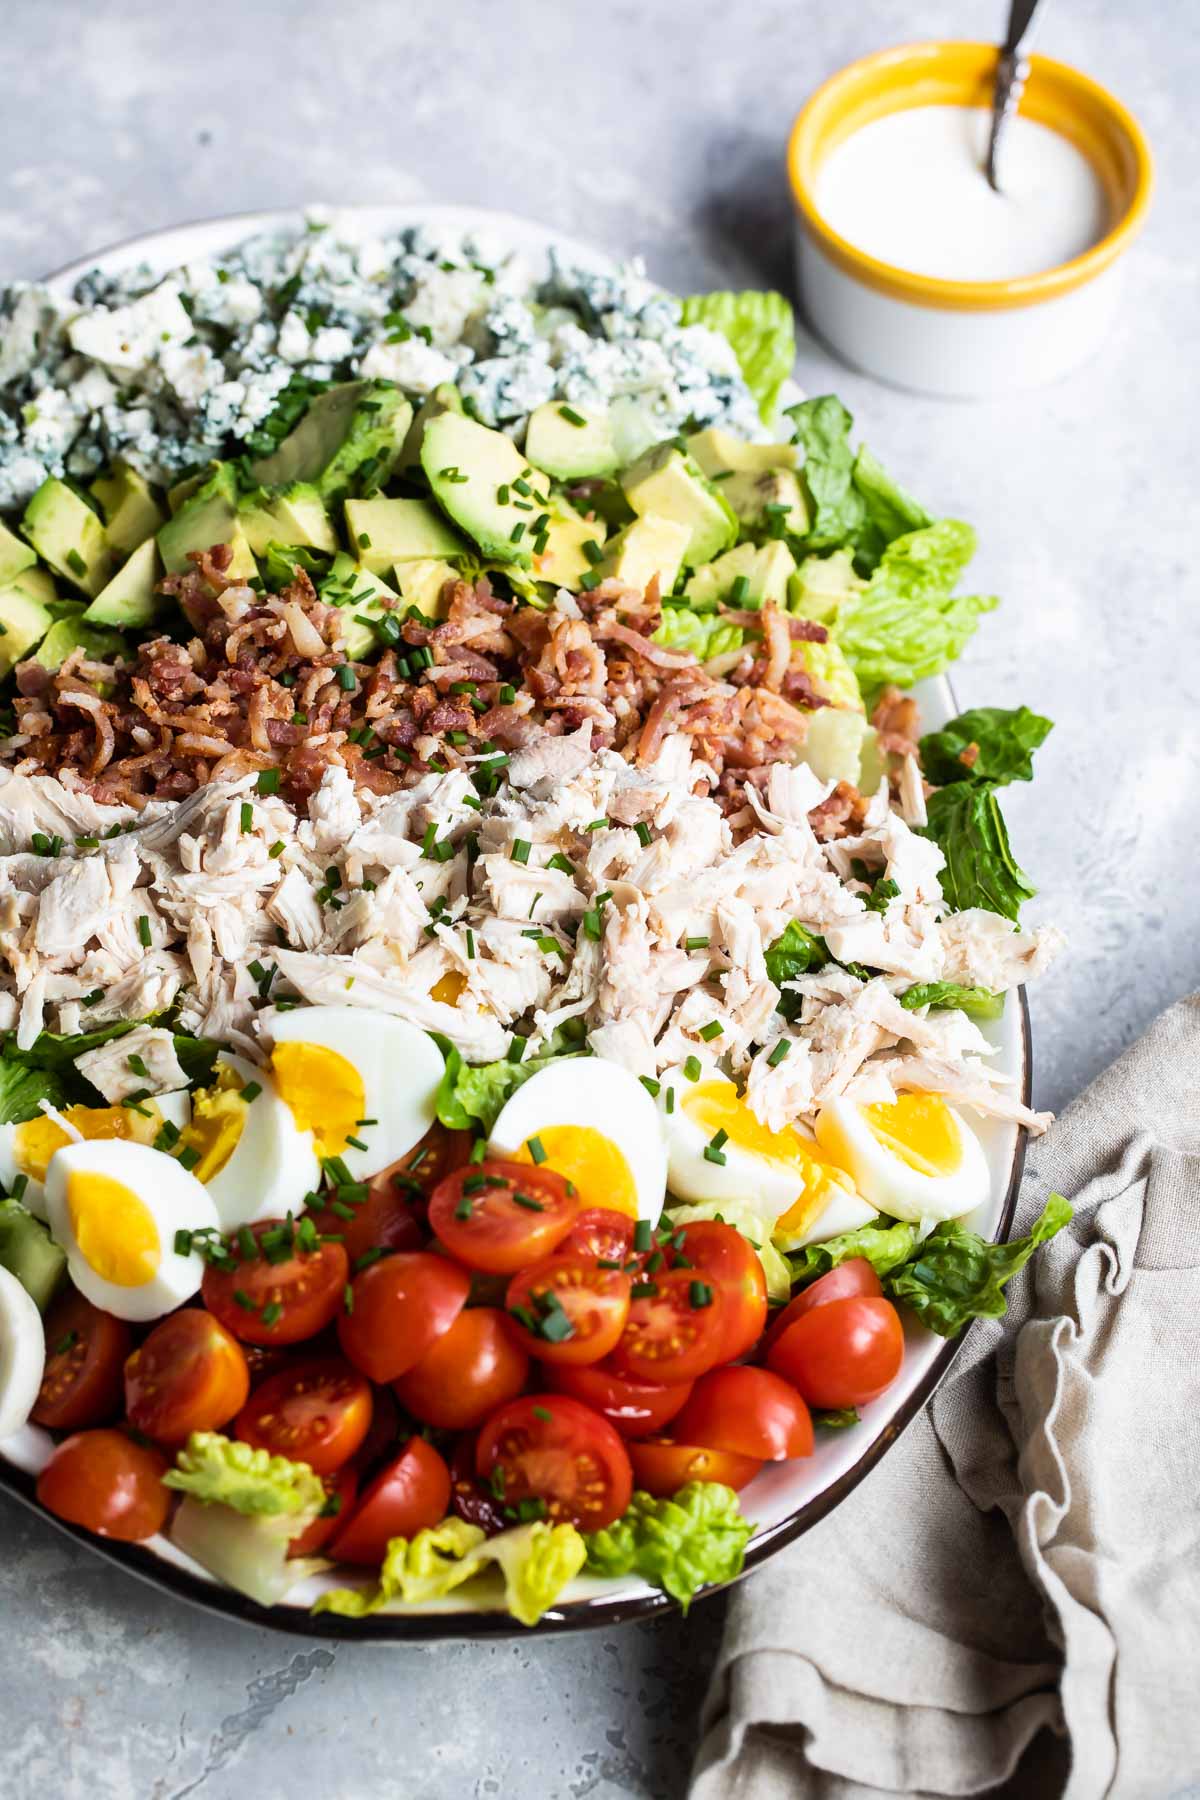 A cobb salad composed on a platter.